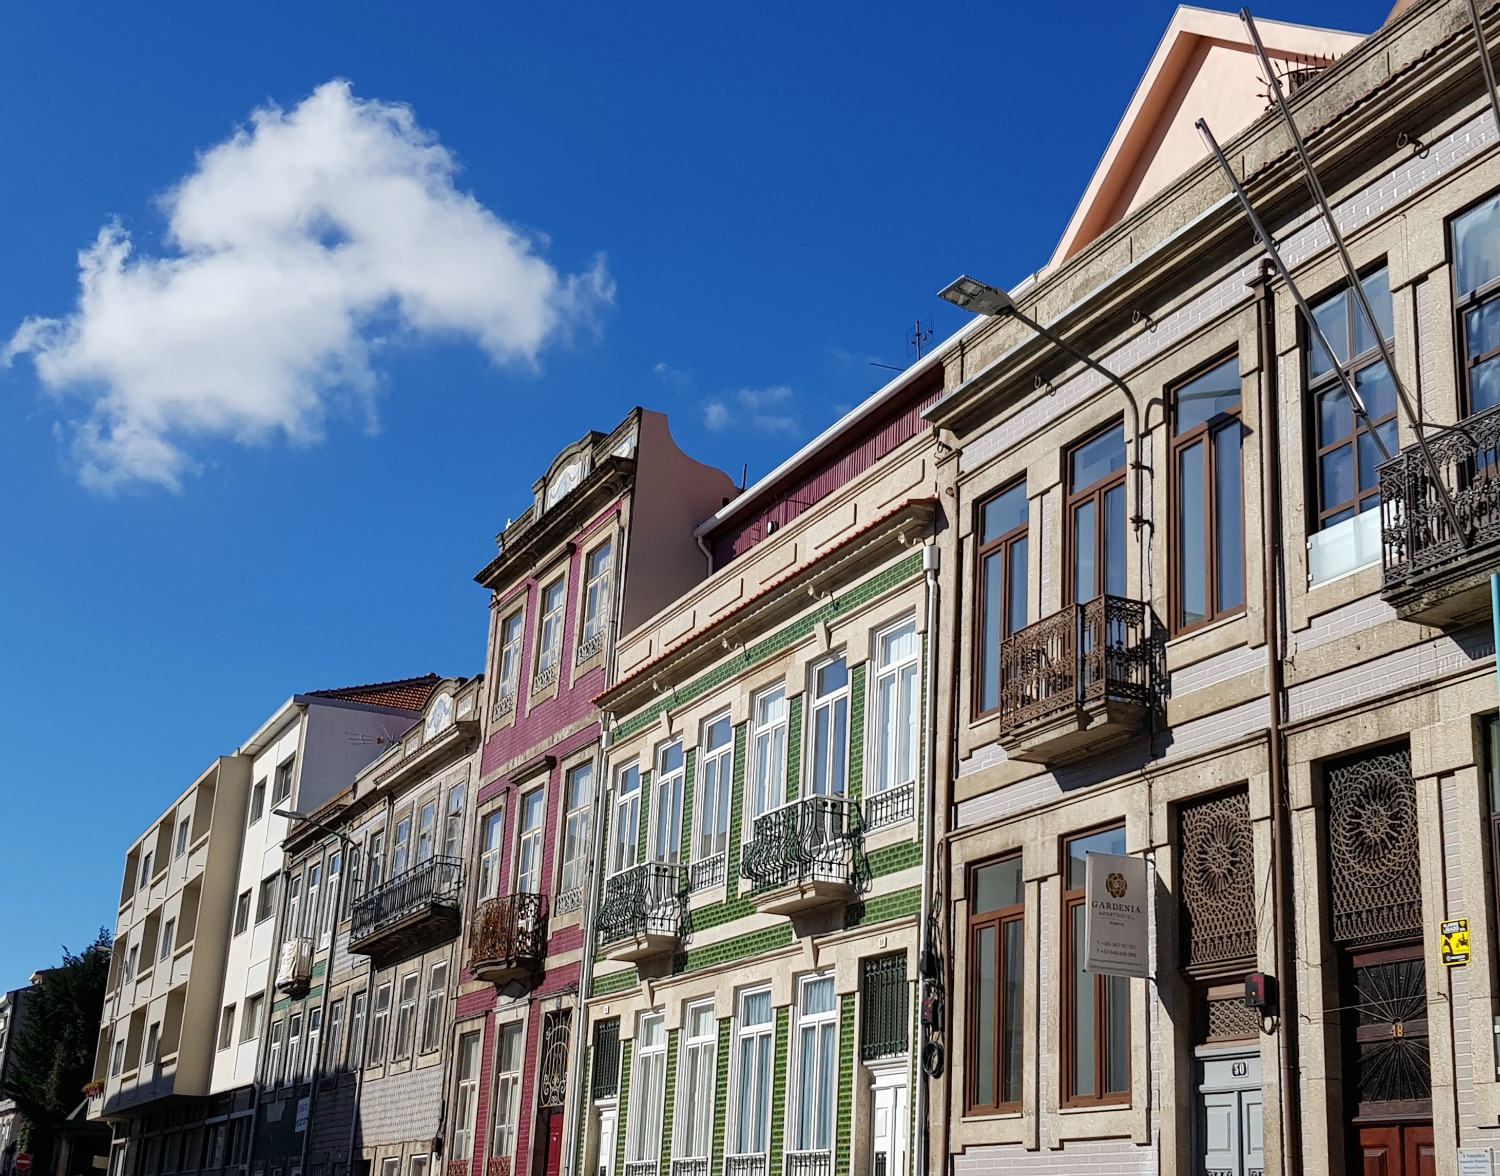 Pastel coloured buildings against a blue sky. Wherever you look in Porto there are wonderful views - my top things to do in Porto with kids